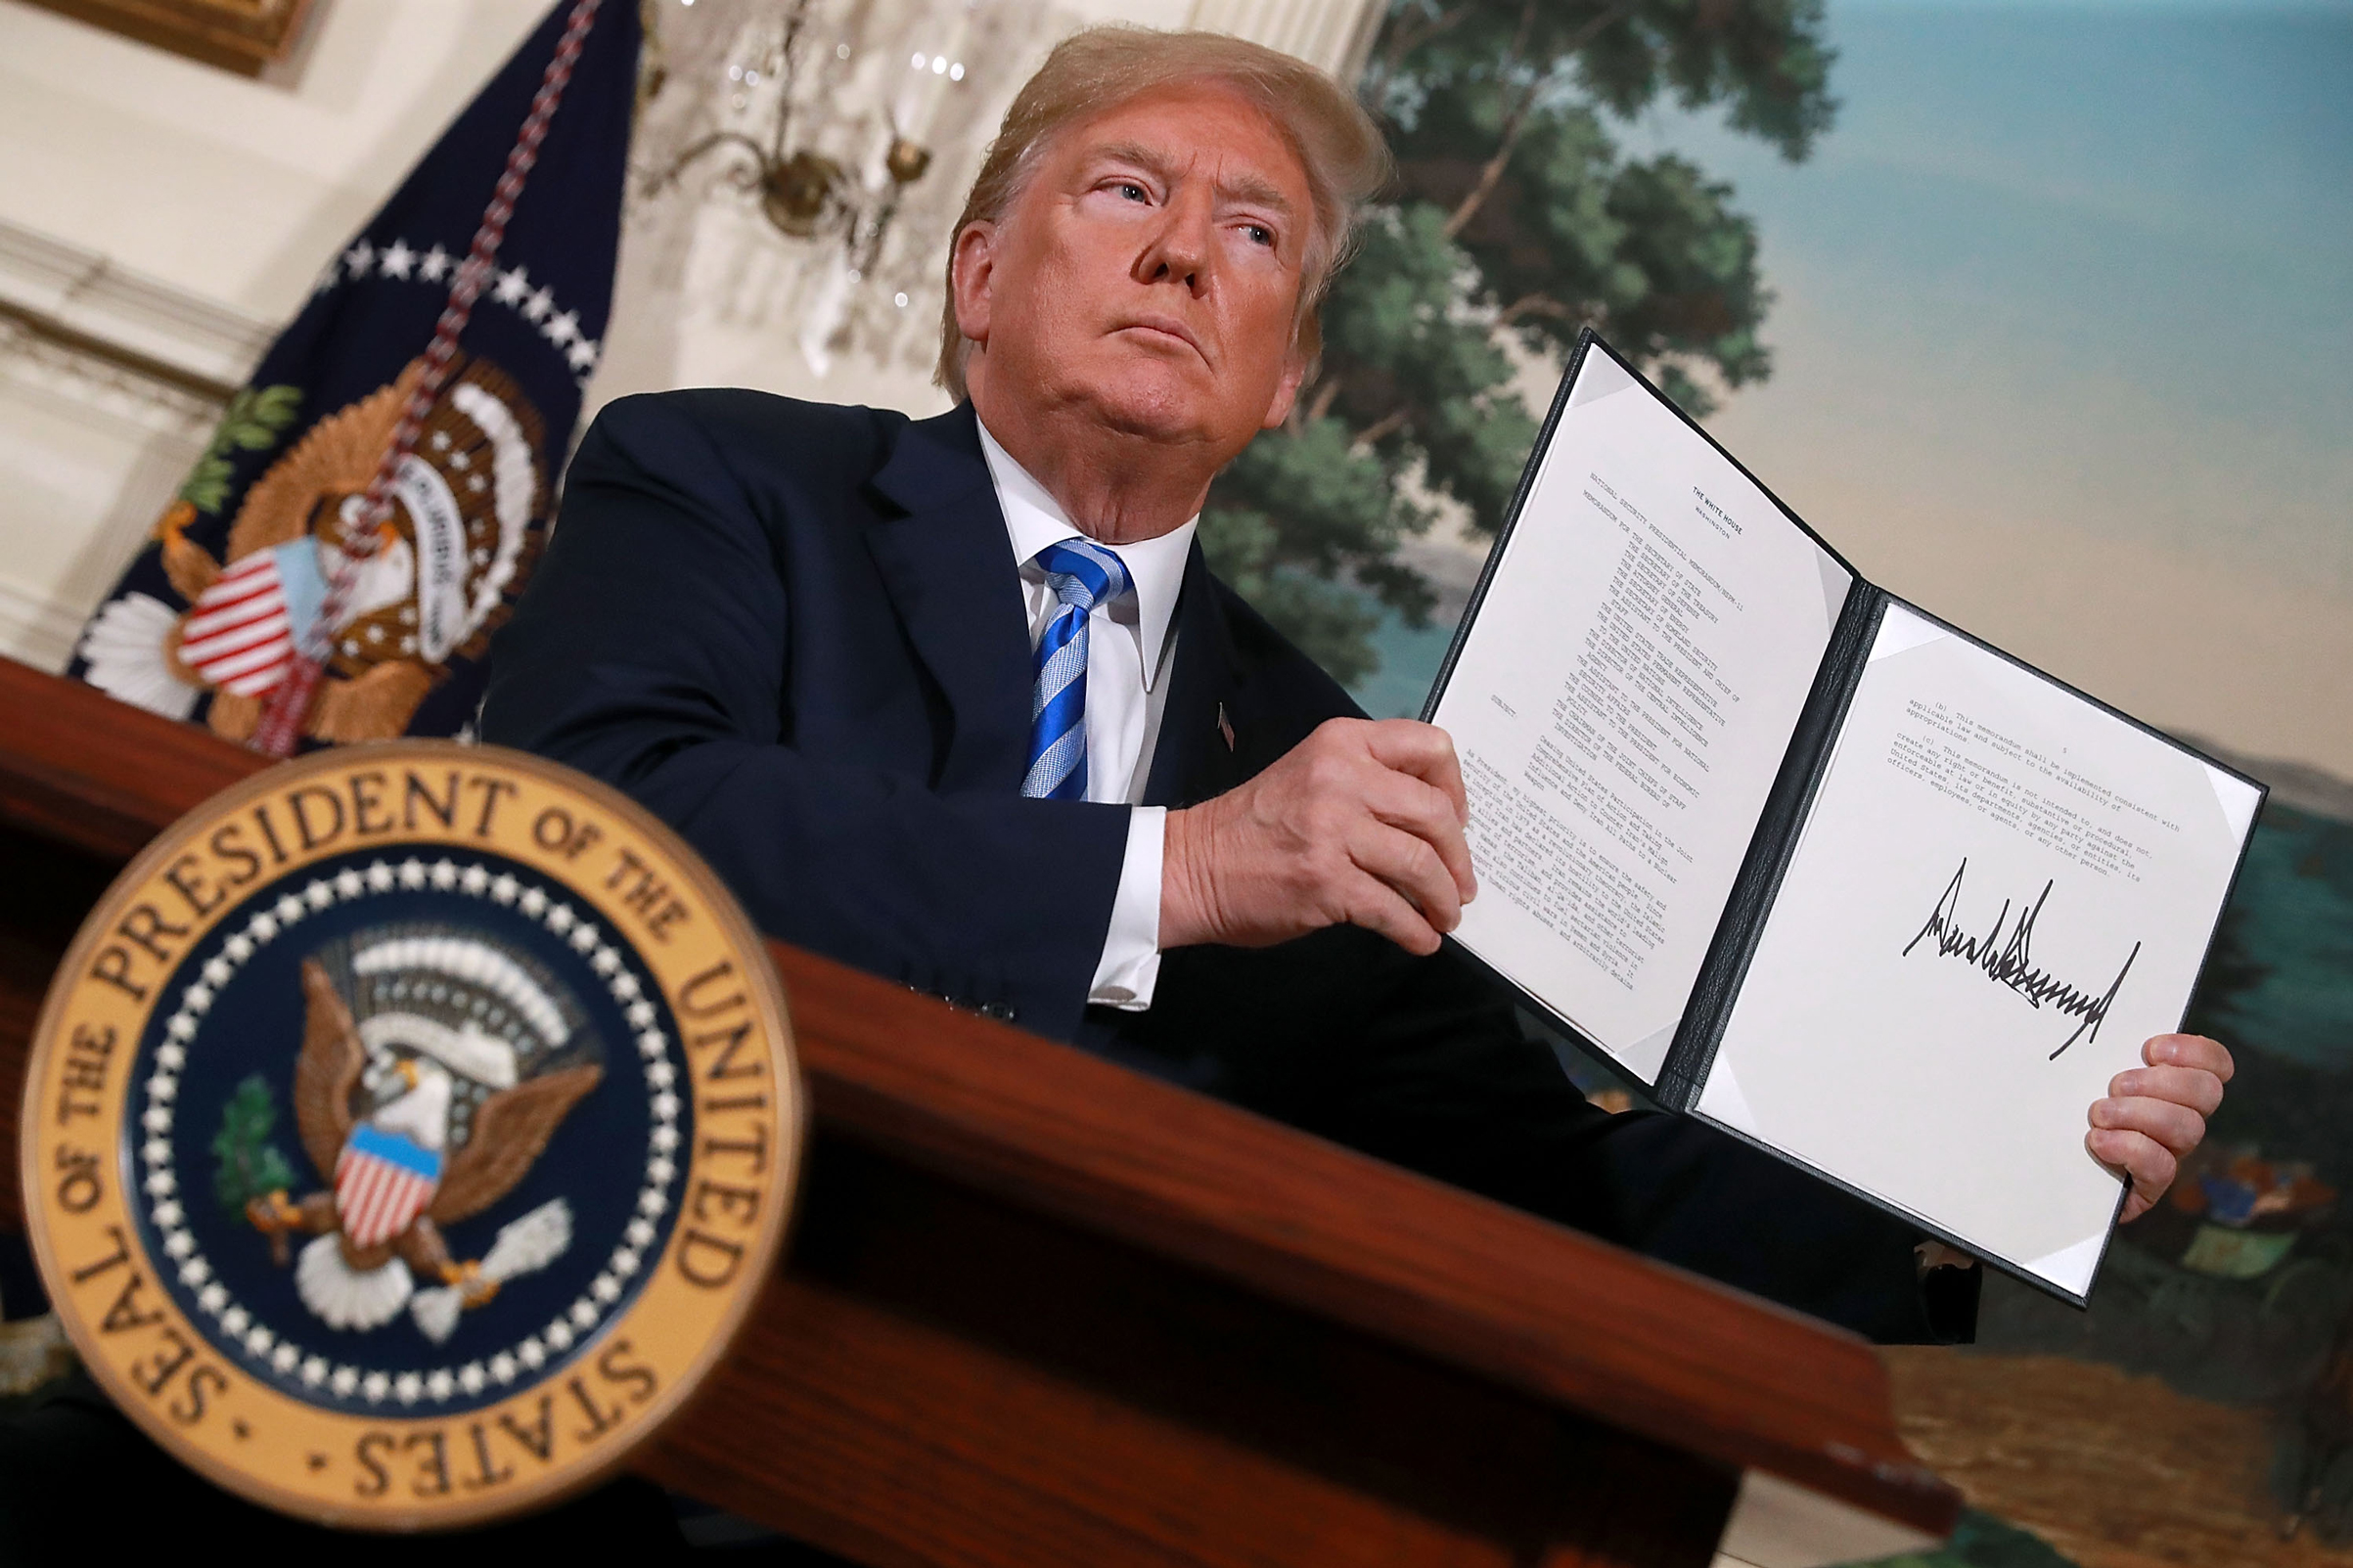 President Donald Trump holds up a memorandum that reinstates sanctions on Iran after he announced his decision to withdraw the United States from the 2015 Iran nuclear deal, on May 8, 2018, in Washington, D.C. (Chip Somodevilla/Getty Images)